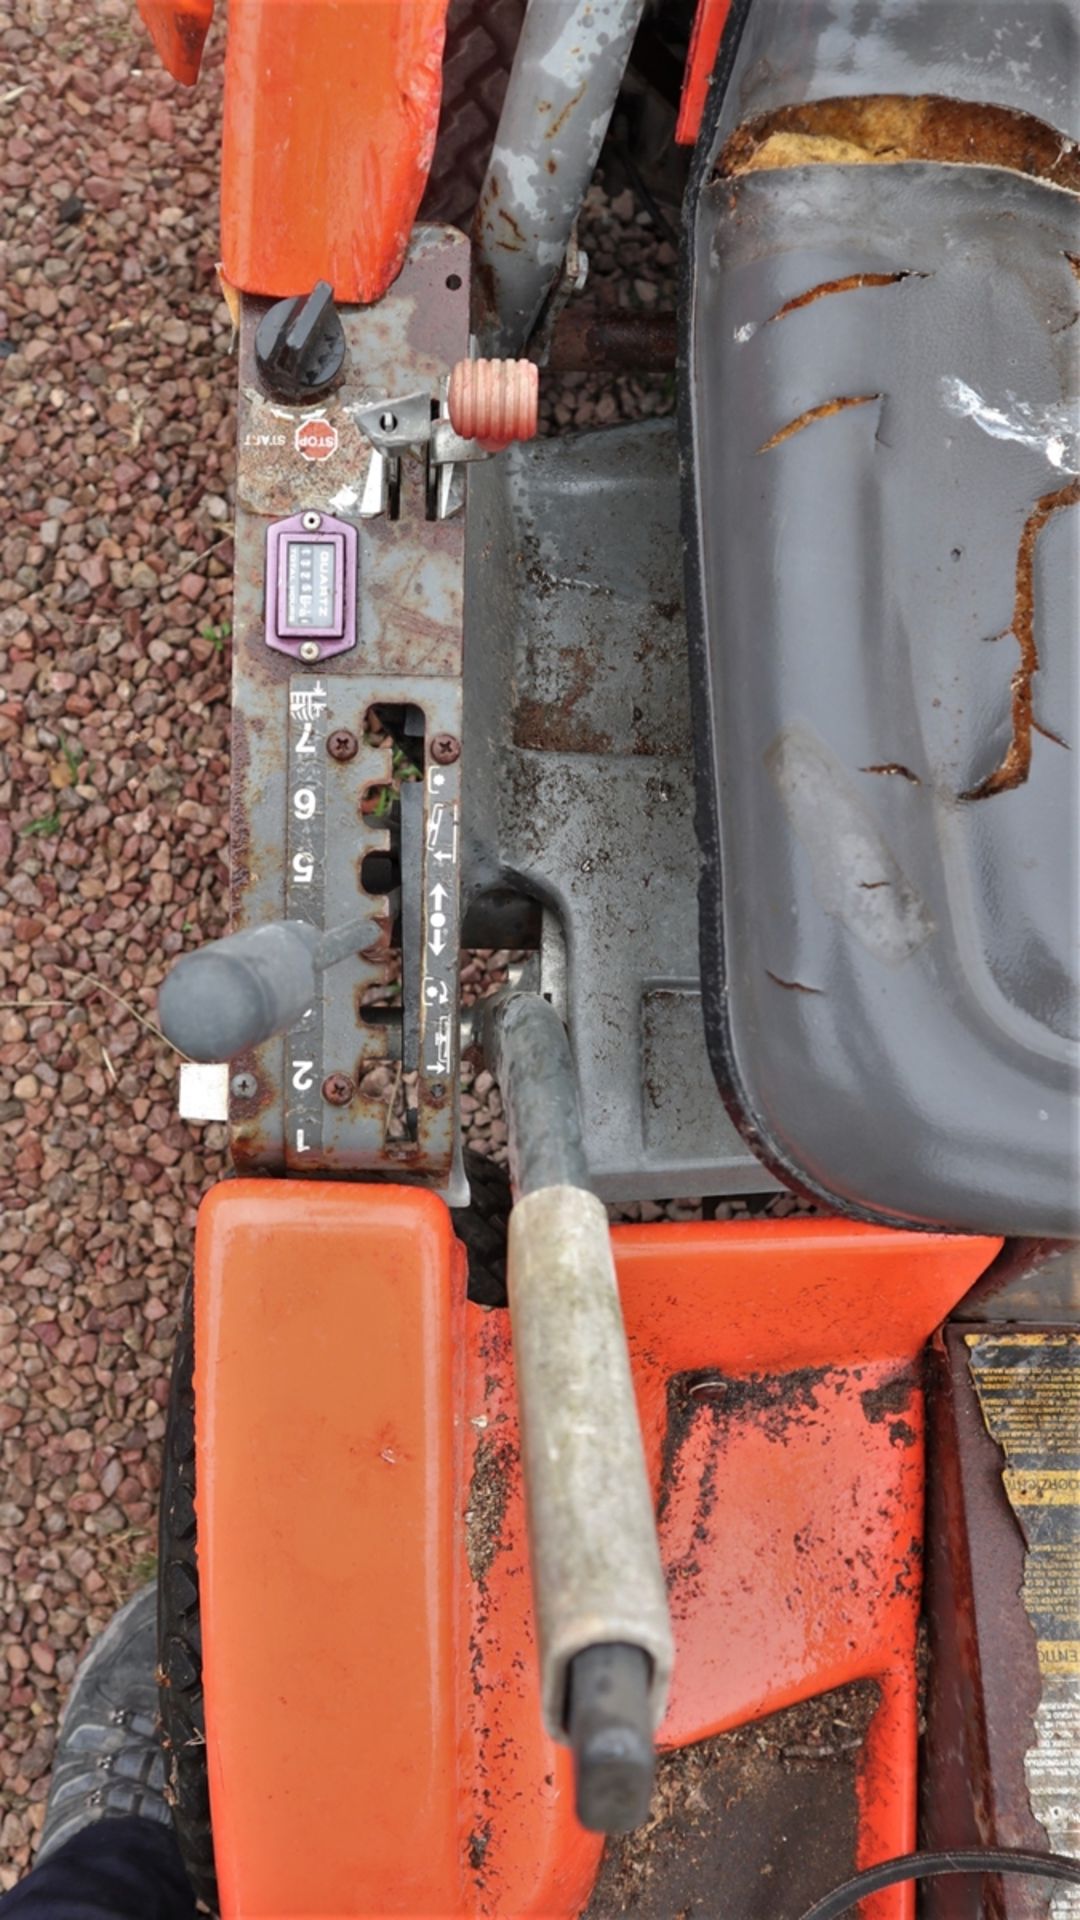 Husqvarna ride on lawn mower - non runner as found - Image 3 of 5